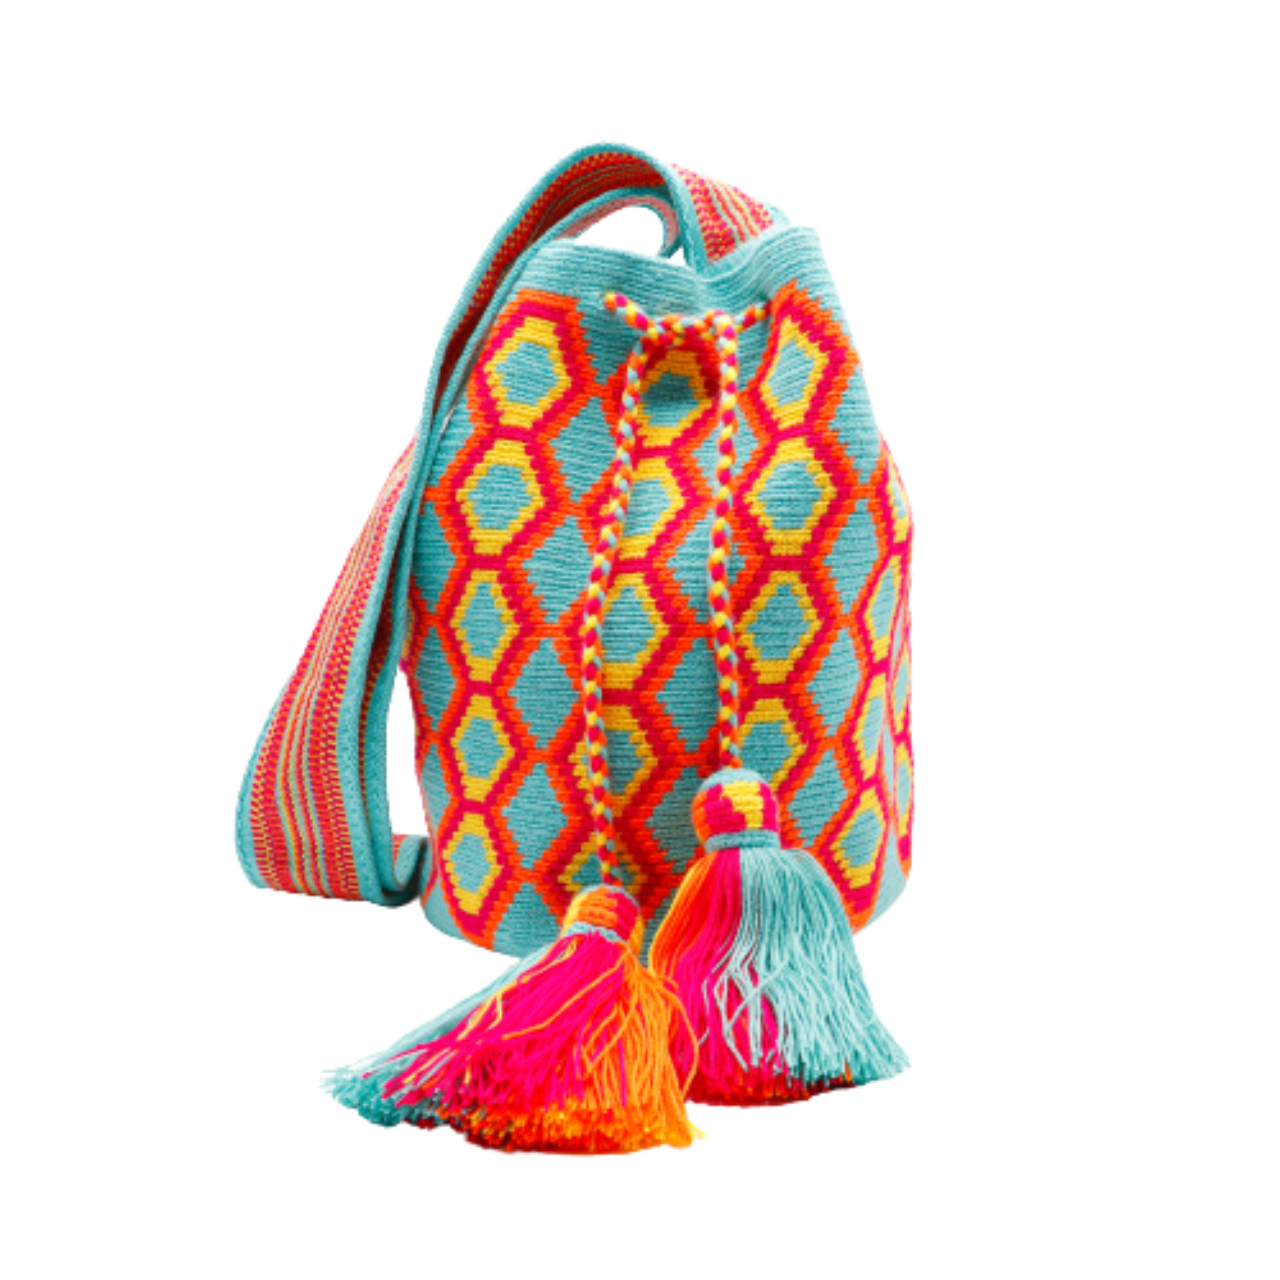 Mariajo Wayuu bag expertly crocheted by a skilled Wayuu artisan, featuring vibrant aqua, orange, magenta, and yellow hues. A visually attractive and chic accessory showcasing intricate craftsmanship.